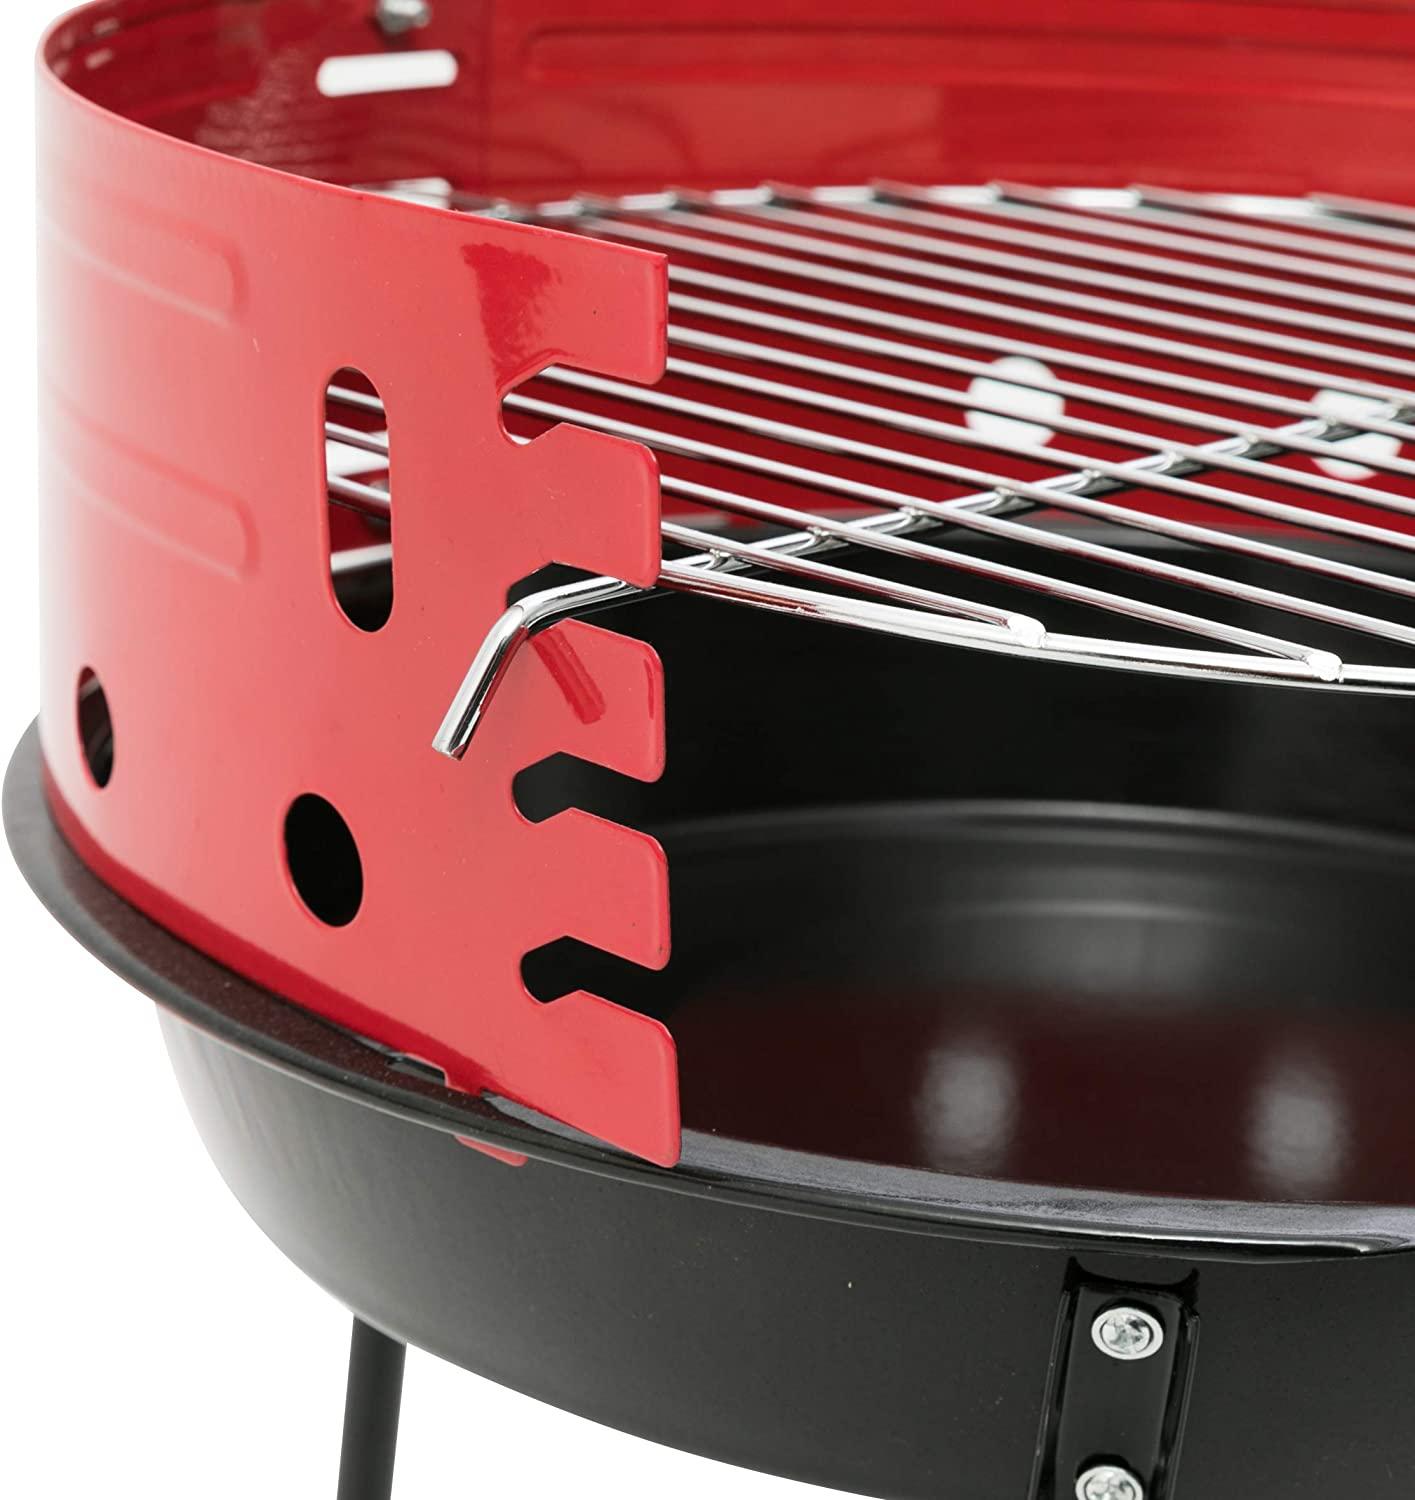 Portable Charcoal Barbecue BBQ 36cm 14inch - Red Black - Home Inspired Gifts